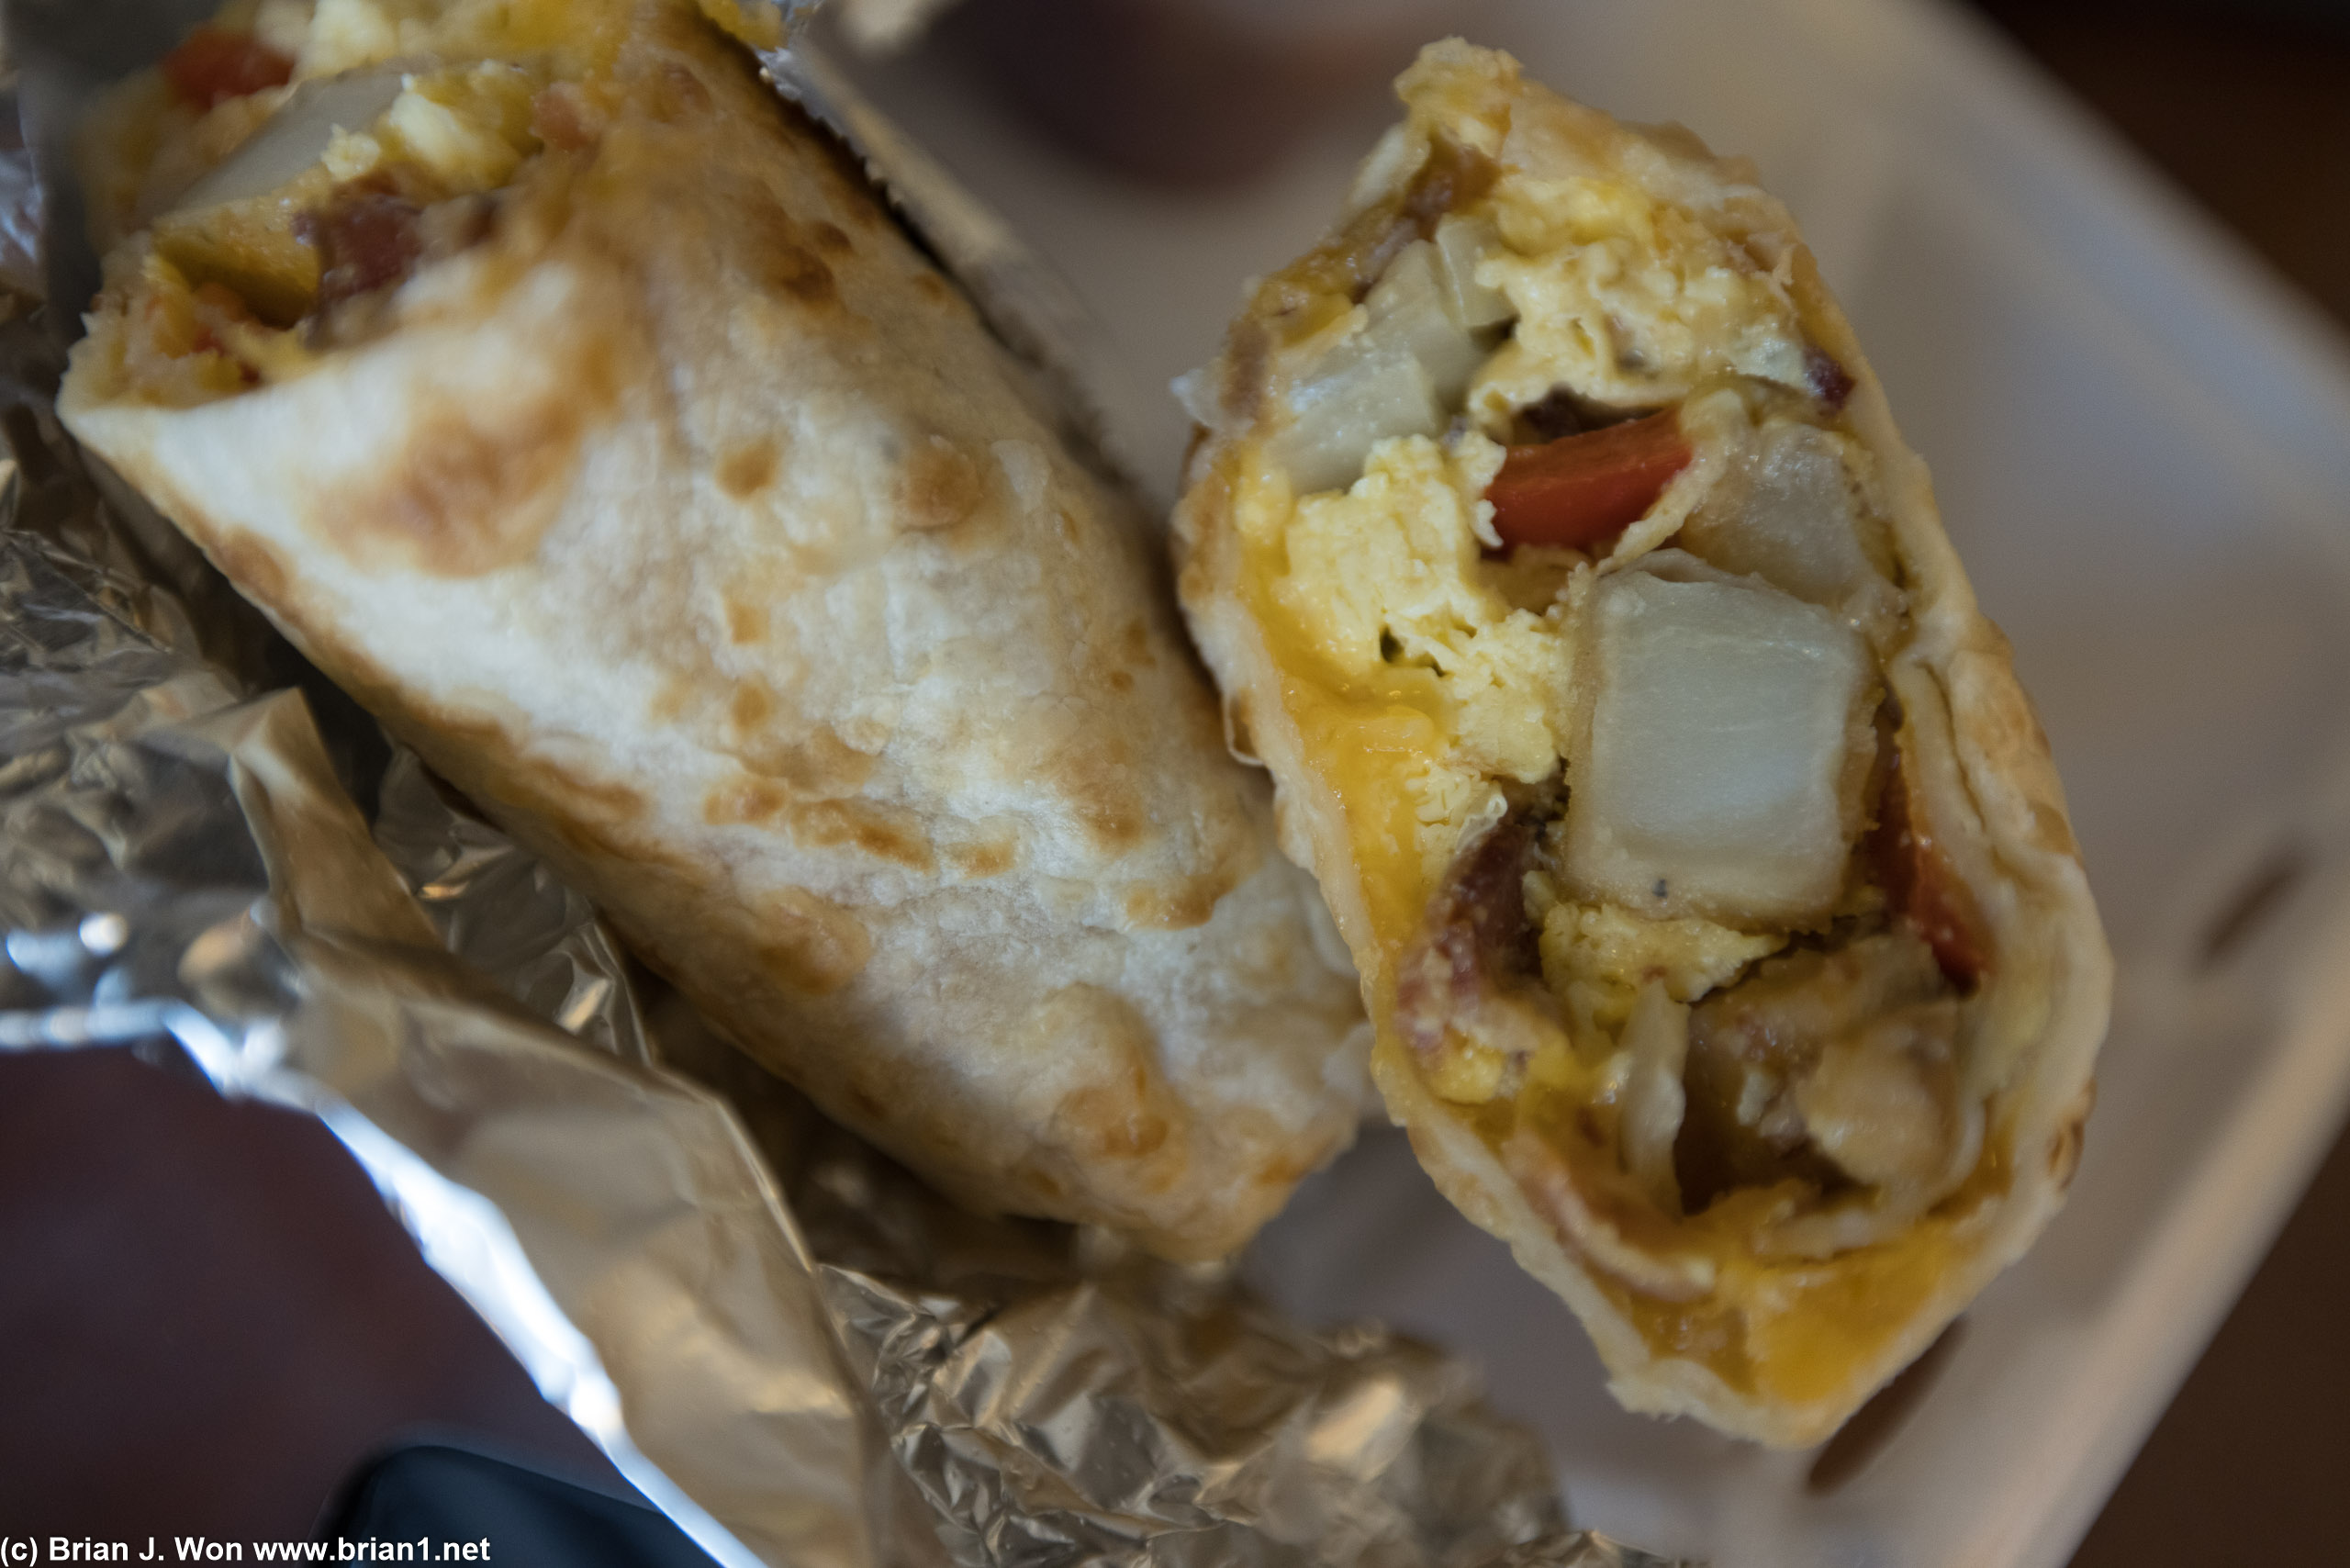 Breakfast burrito was decent but not worth the price.